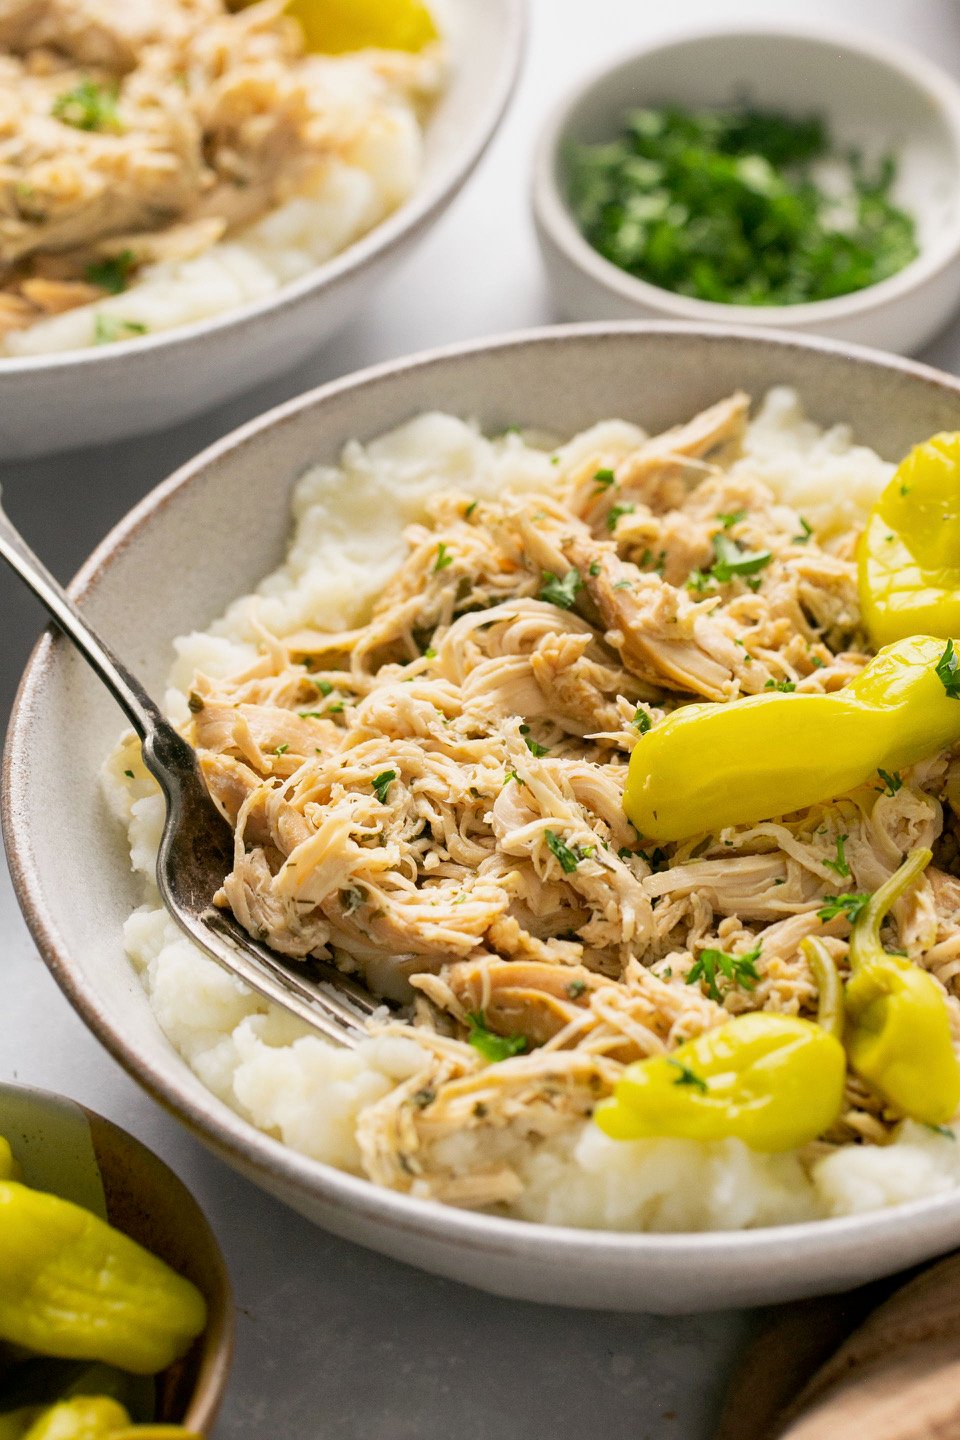 a white bowl filled with mashed potatoes, shredded chicken, and pepperoncini peppers